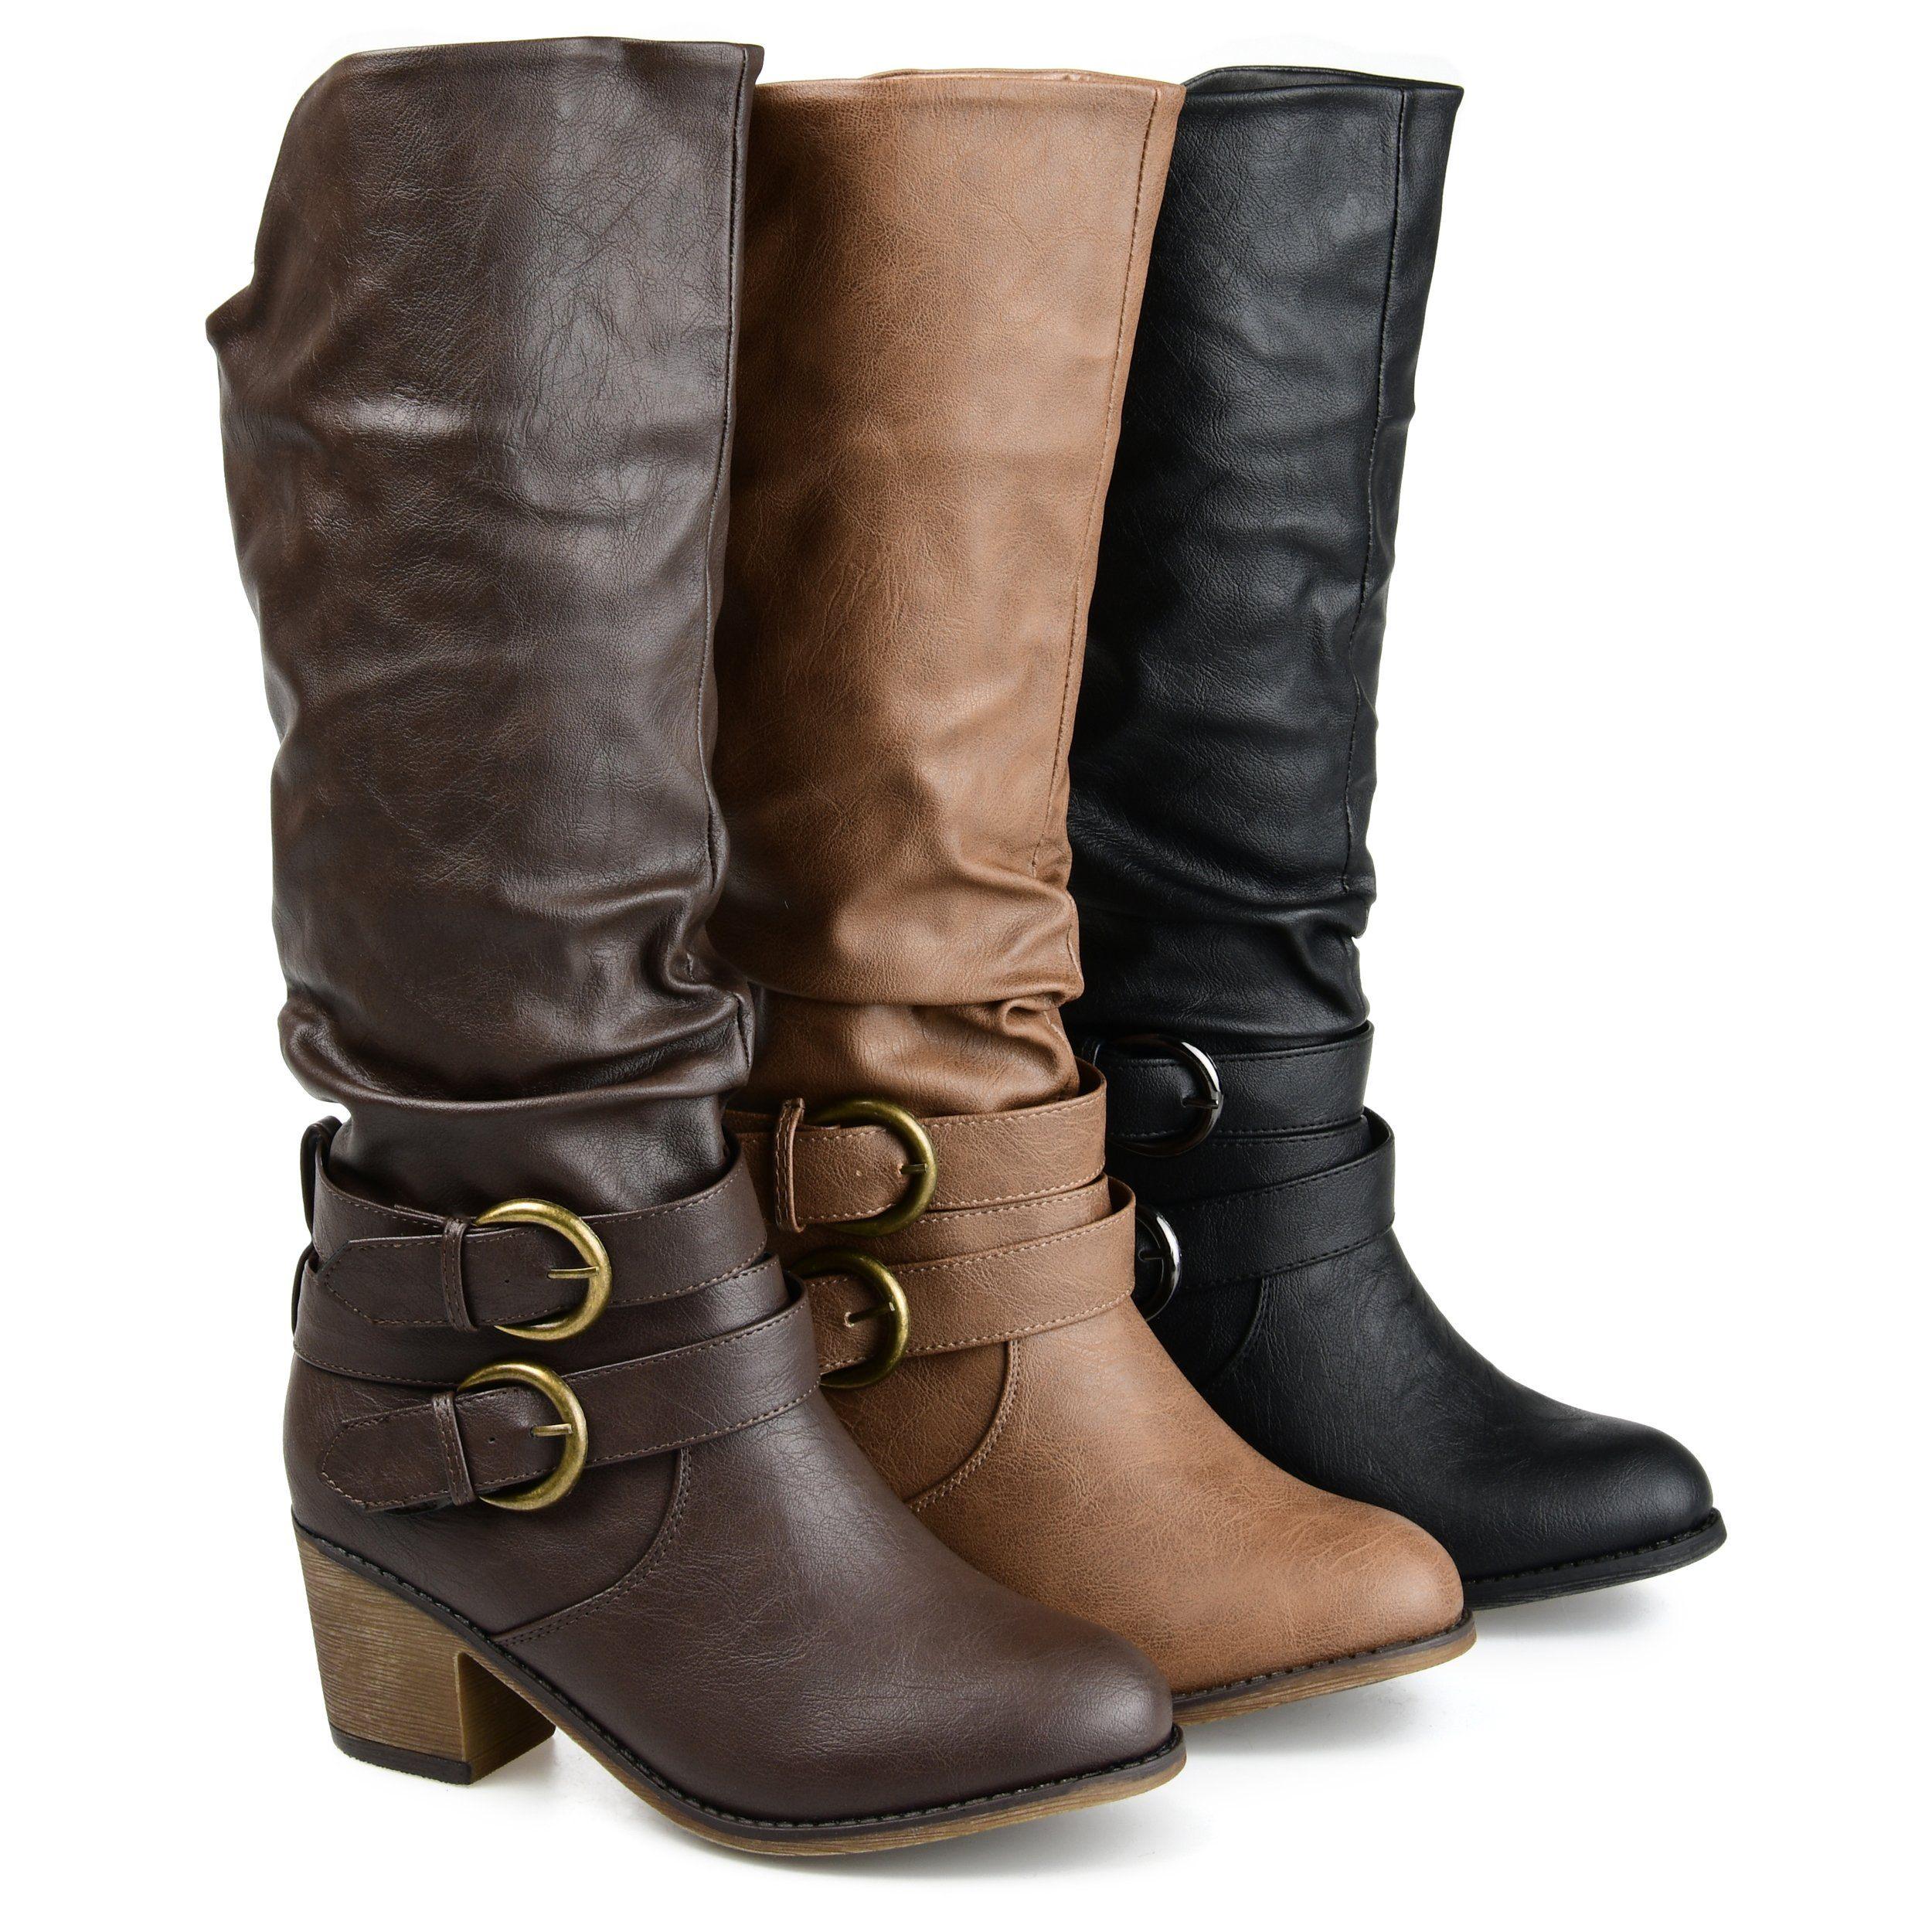 Late Boot, Women's Slouchy Boots